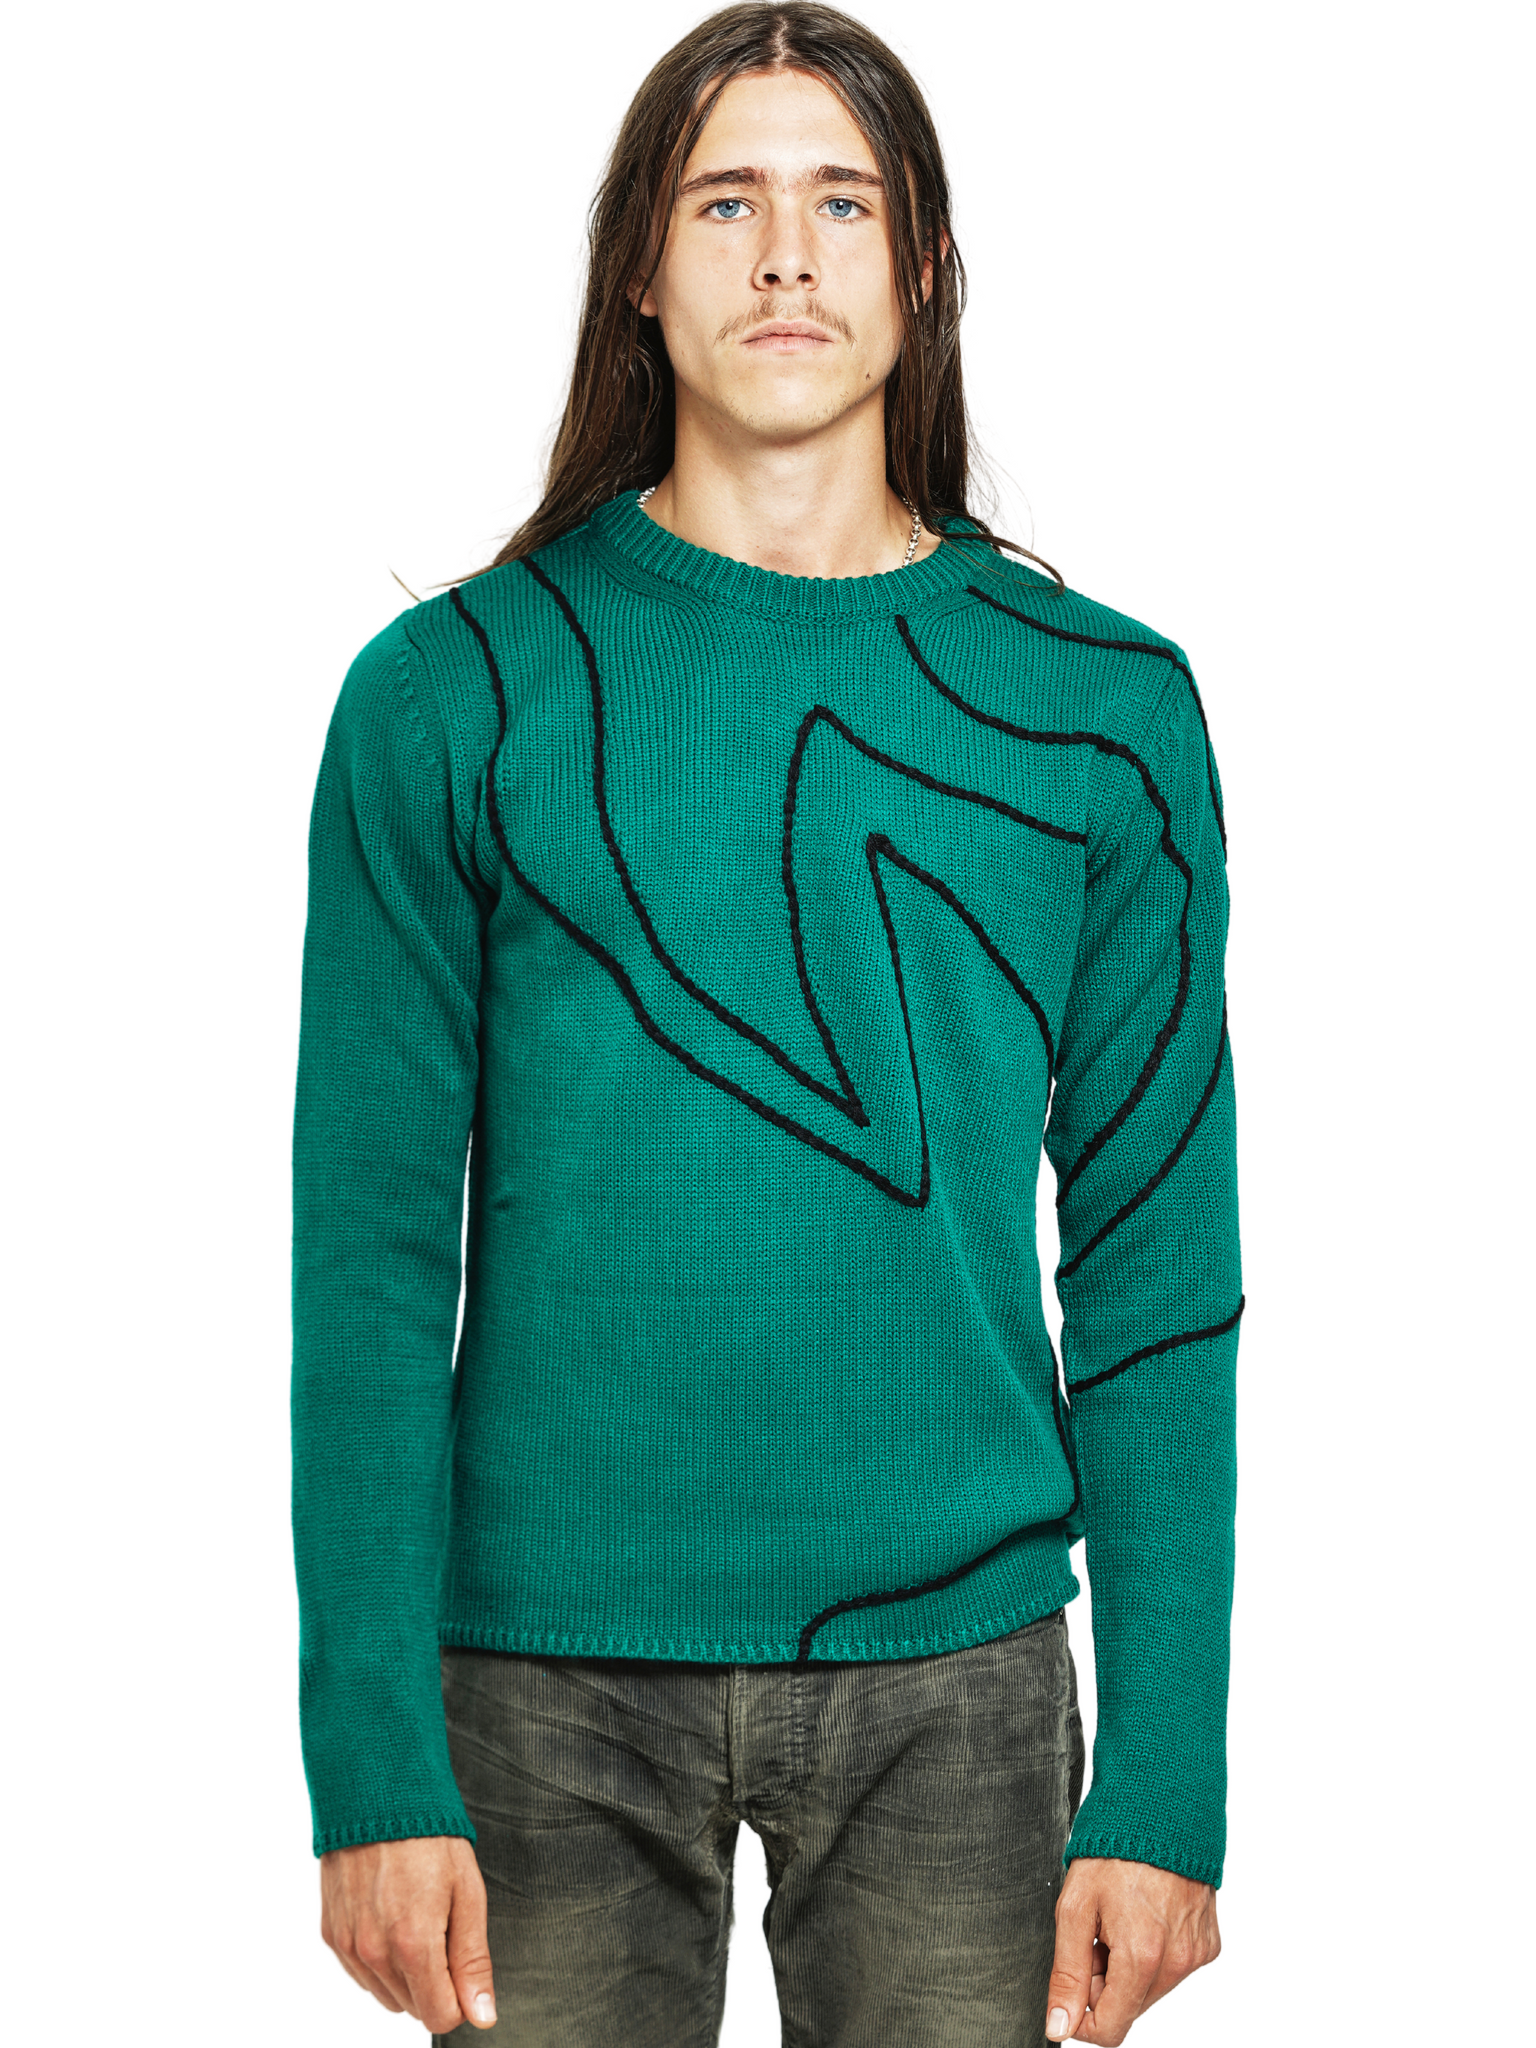 O'Keeffe Embroidery Jumper